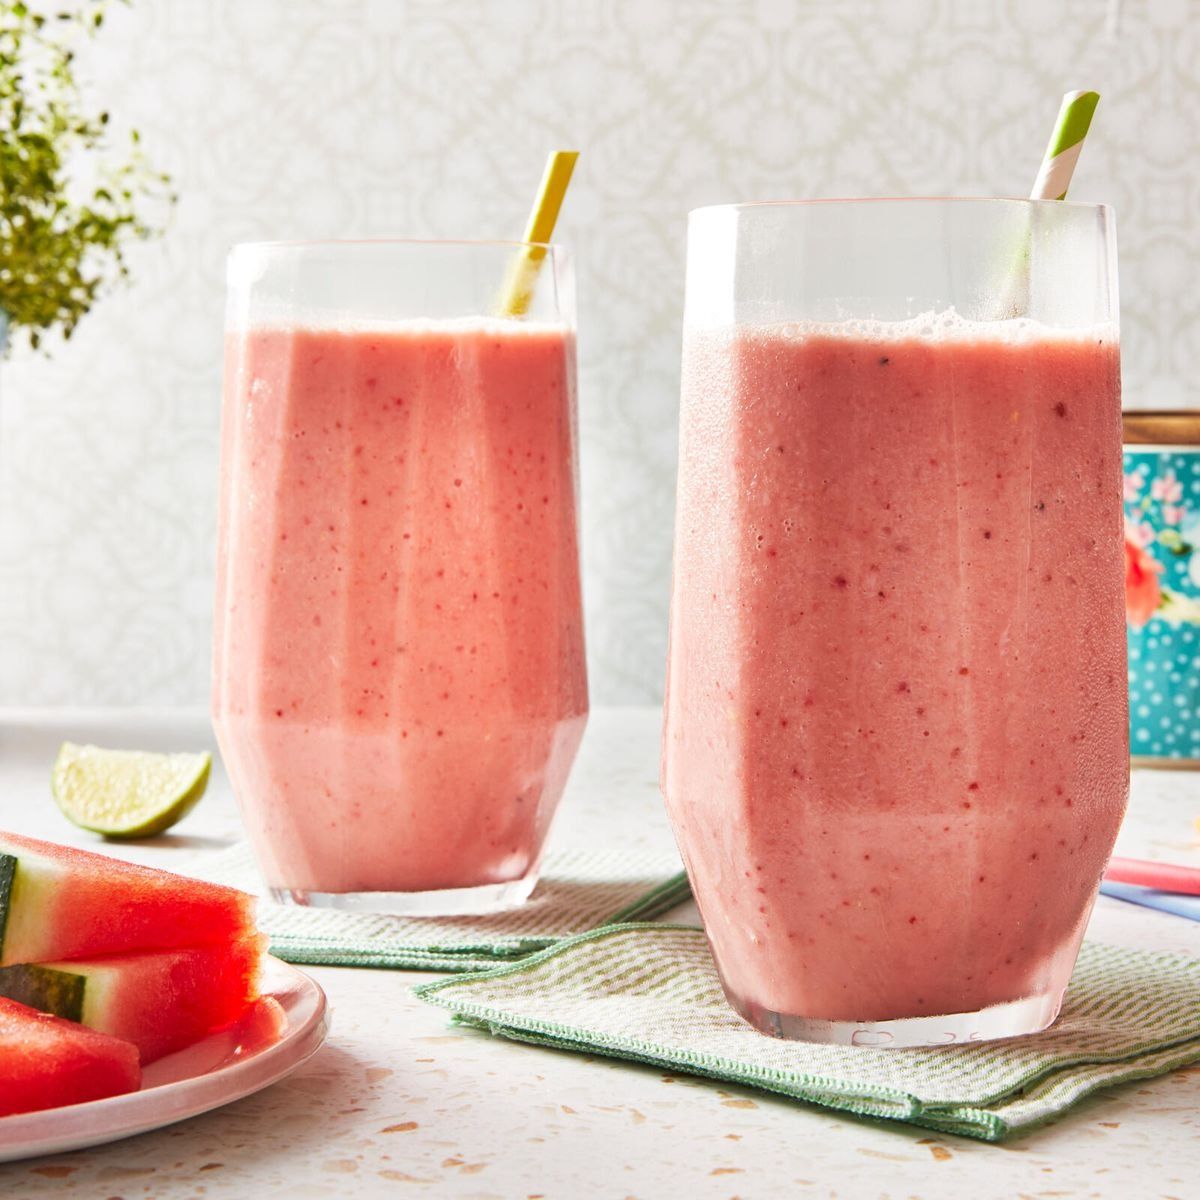 15 Best Smoothie Recipes - Healthy Smoothie Ideas